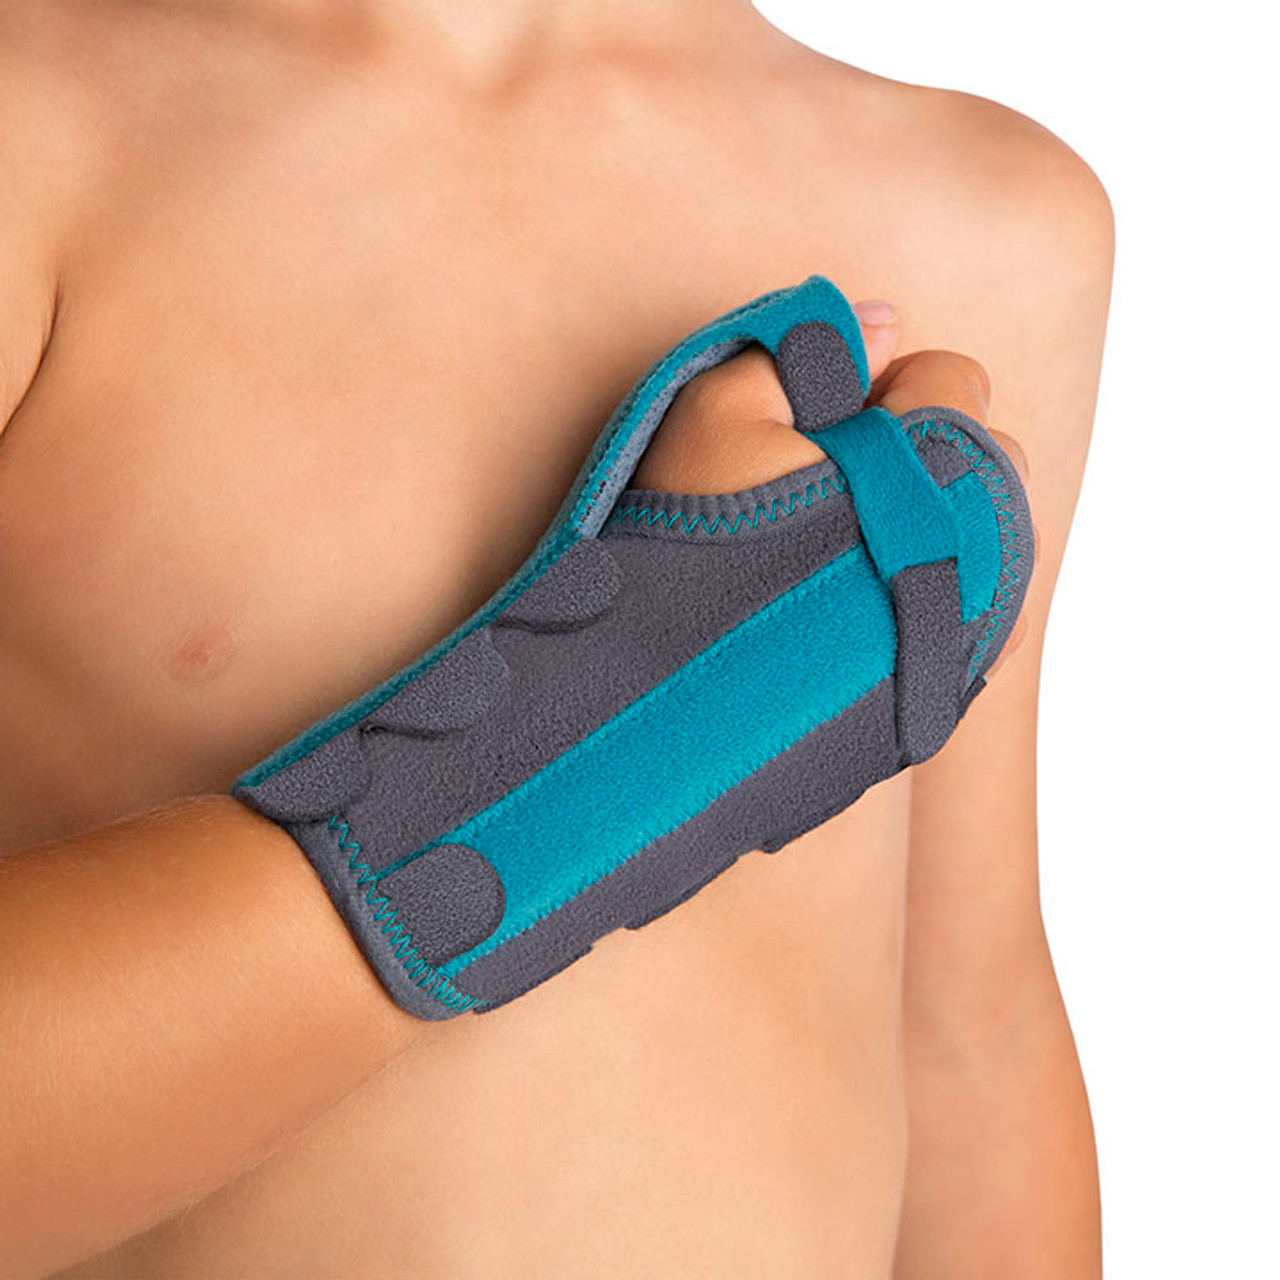 PEDIATRIC THUMB ATTACHMENT FOR WRIST SUPPORT - SIZE 2, OP1155-2